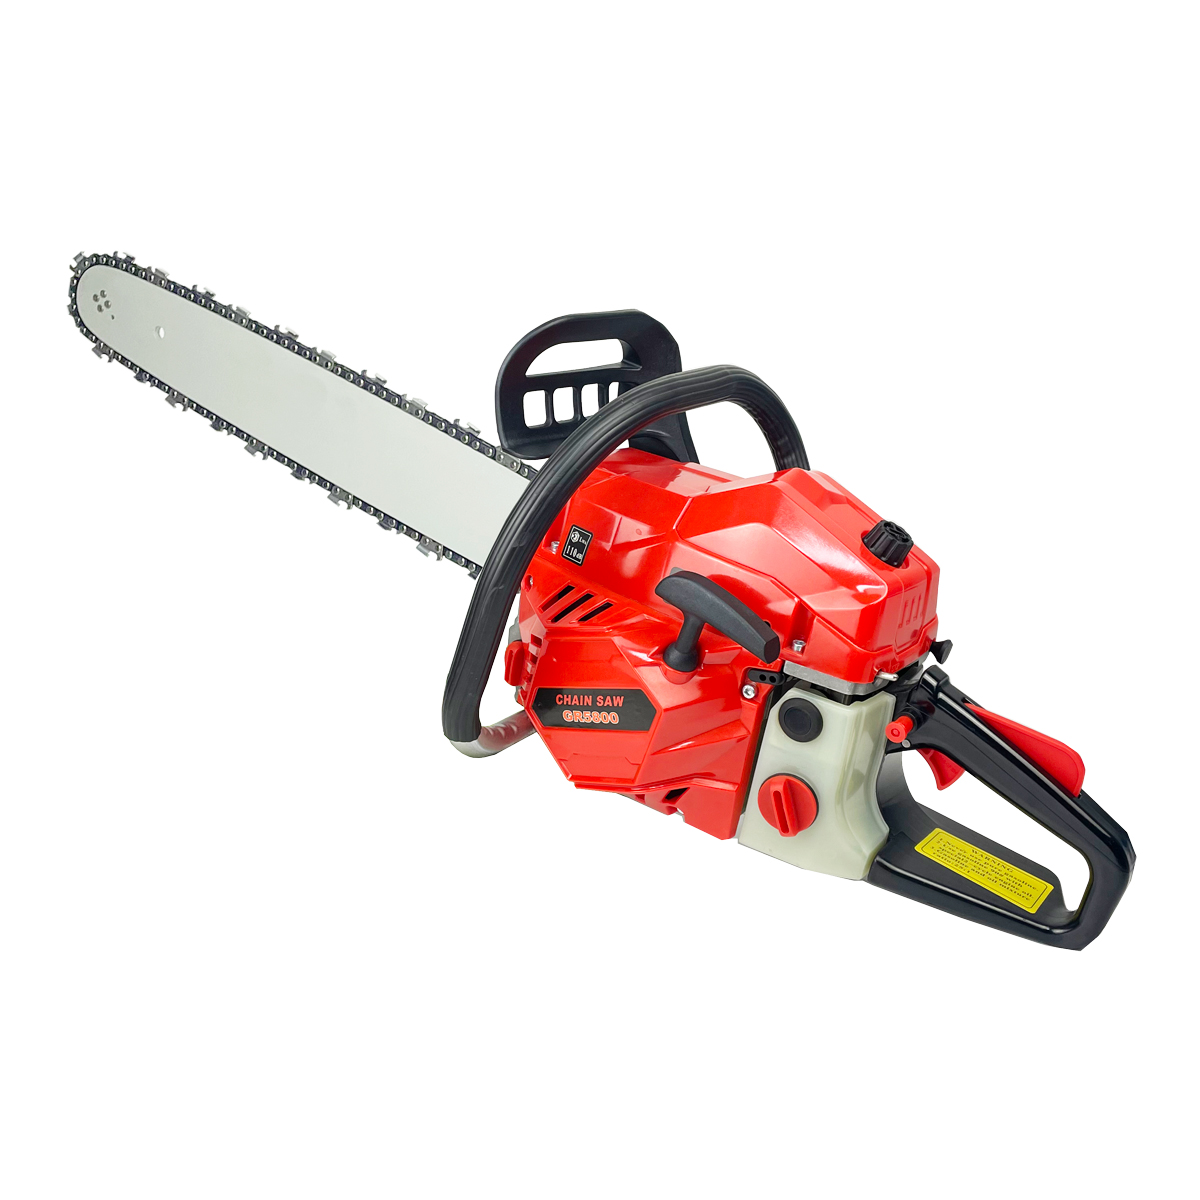 5800 chain saw(easy starter/transparent tank)